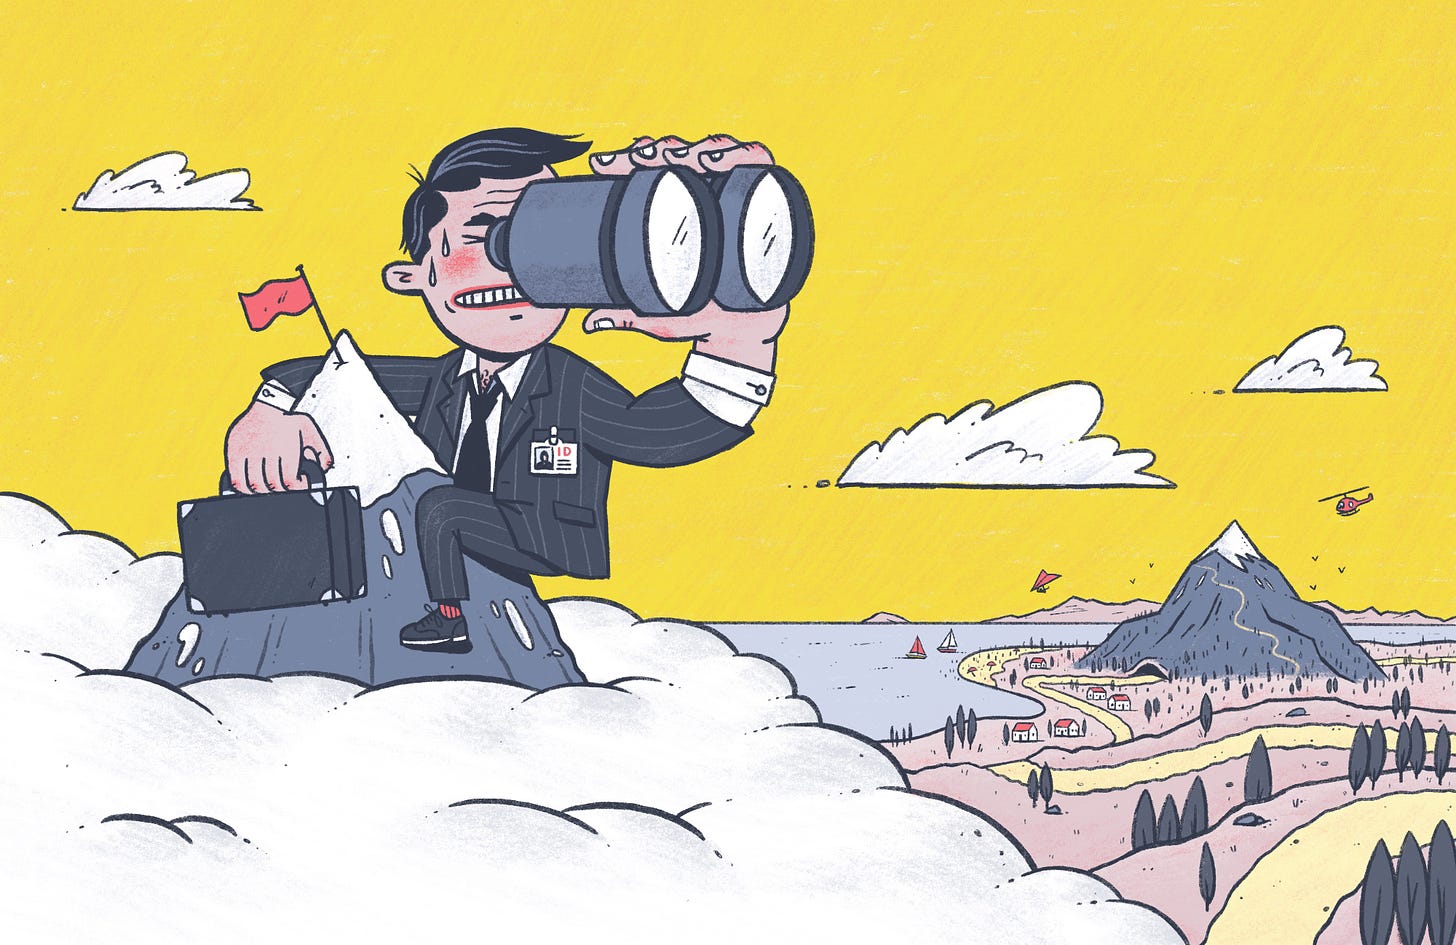 A man in a suit is on top of a mountain, looking through binoculars at another mountain far away. 